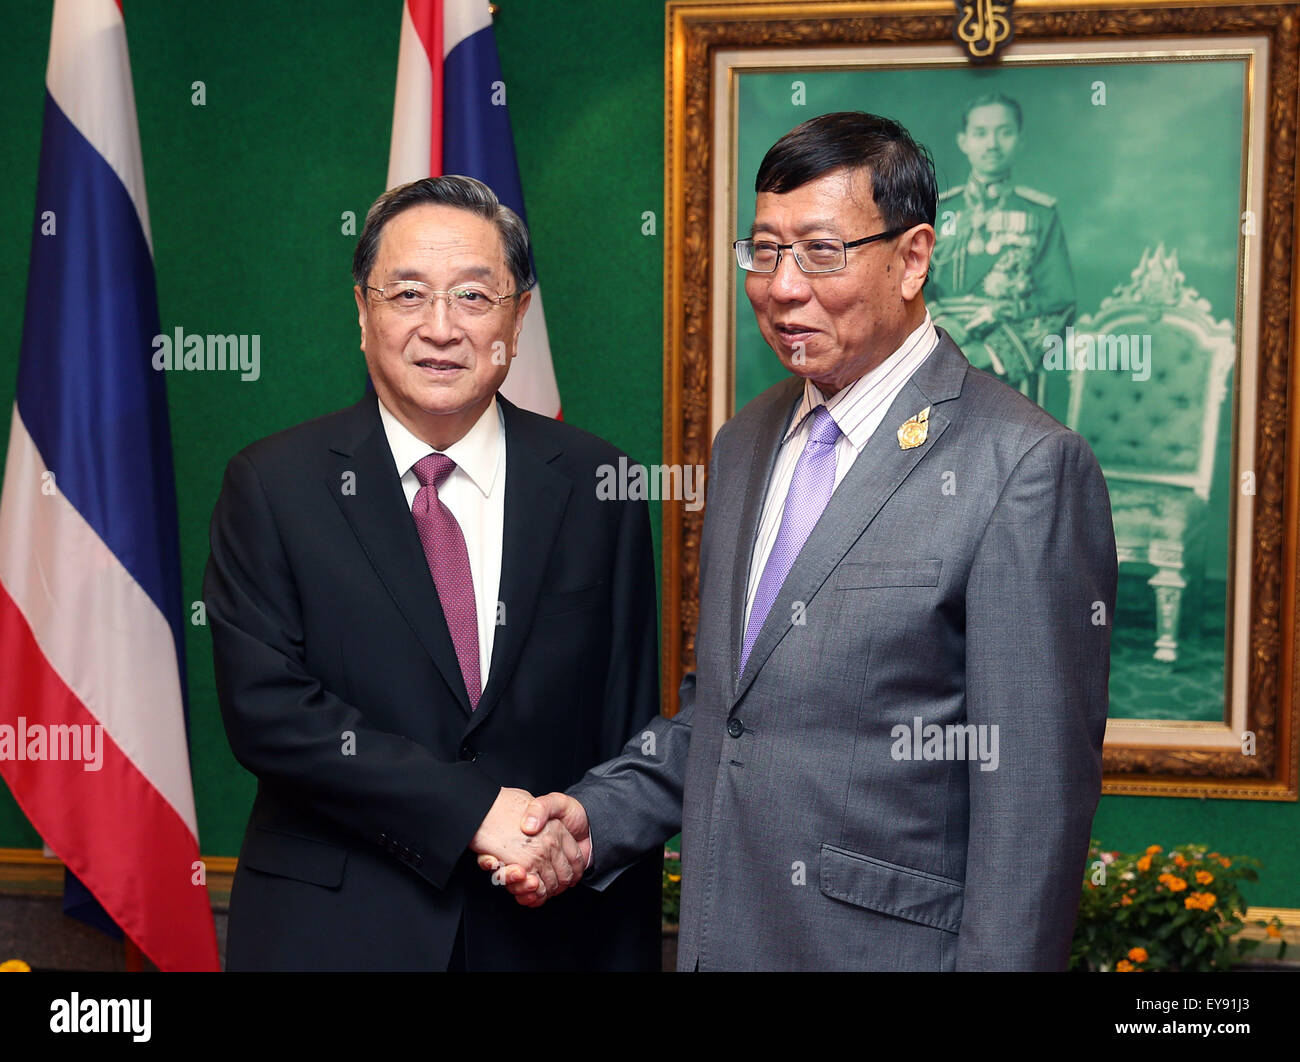 (150724) -- BANGKOK, July 24, 2015 (Xinhua) -- Yu Zhengsheng (L), chairman of the National Committee of the Chinese People's Political Consultative Conference, holds talks with the president of Thailand's national legislative assembly Pornpetch Wichitcholchai in Bangkok, Thailand, July 21, 2015. Yu Zhengsheng paid an official visit to Thailand from July 21 to 24. (Xinhua/Yao Dawei) (zkr) Stock Photo